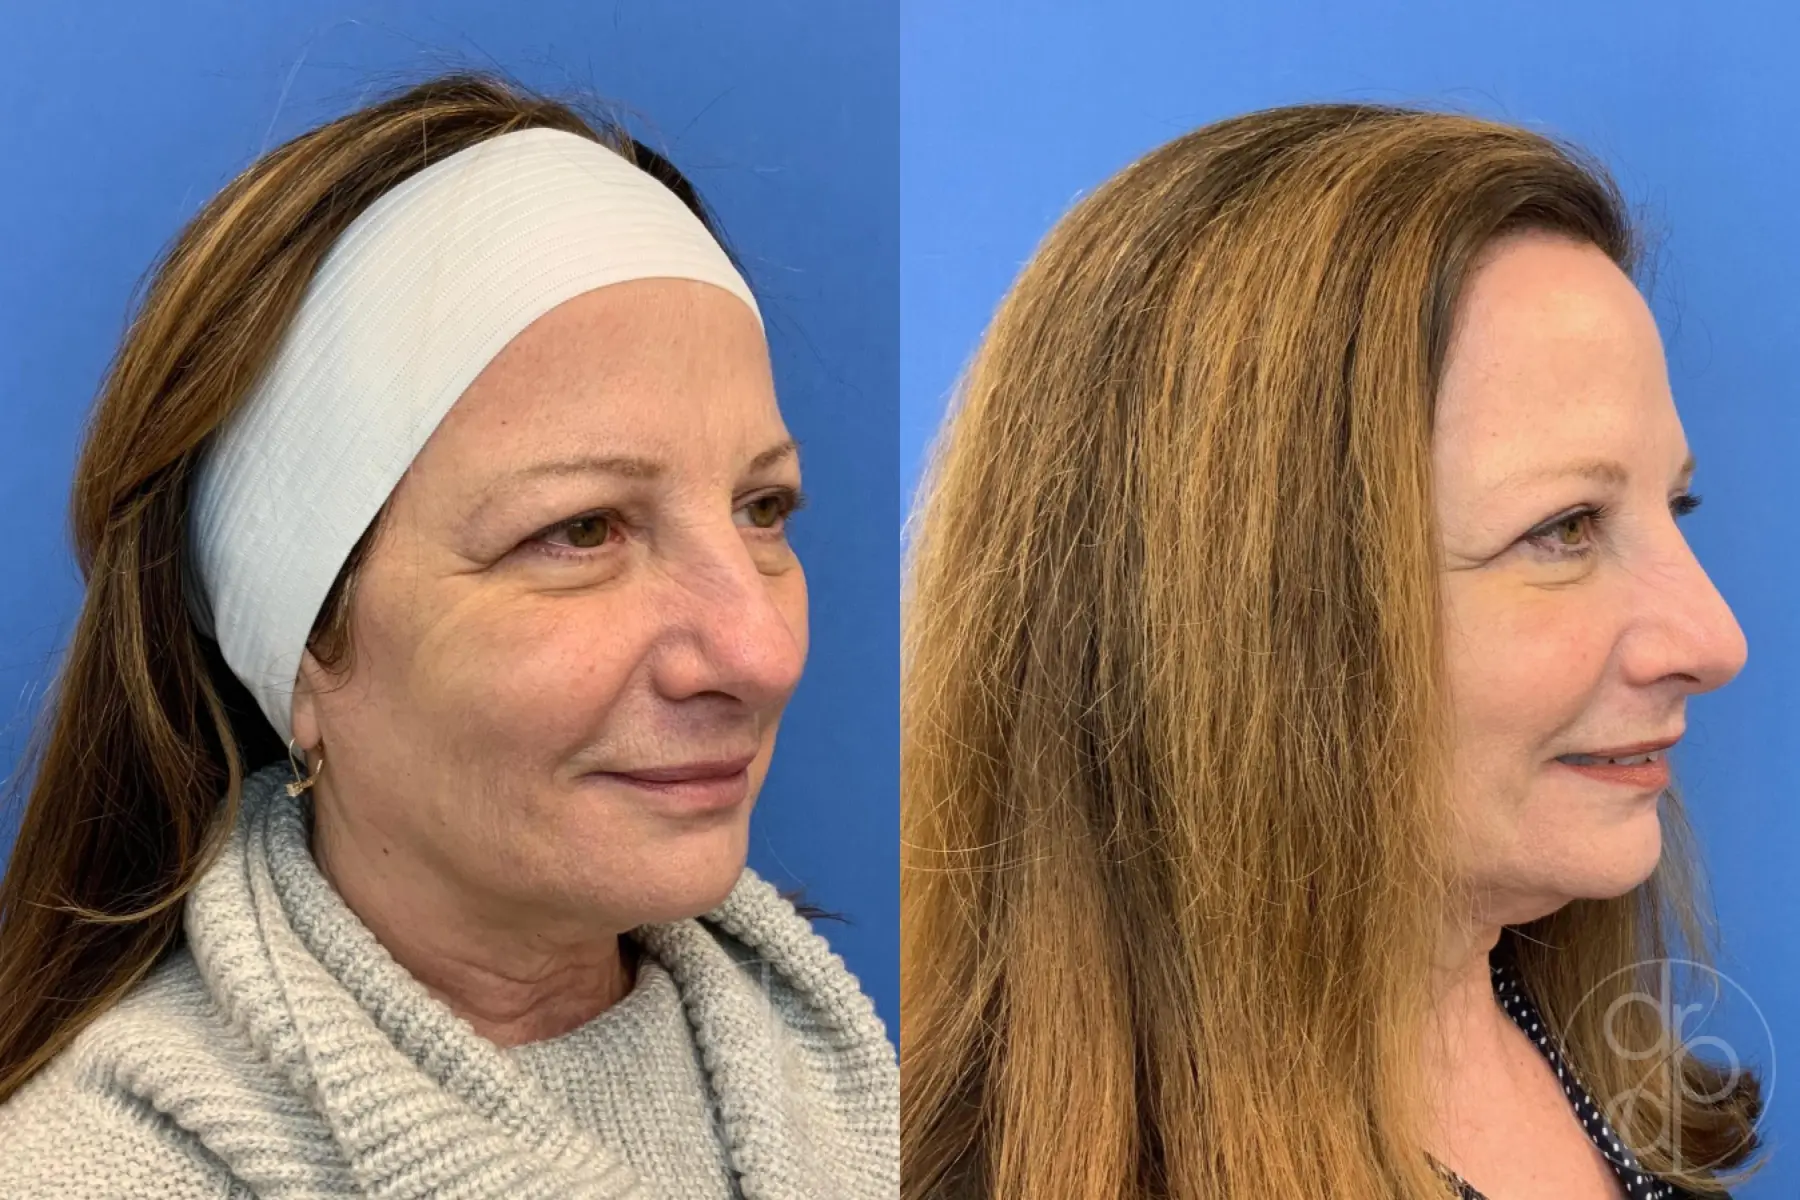 patient 10645 blepharoplasty before and after result - Before and After 2